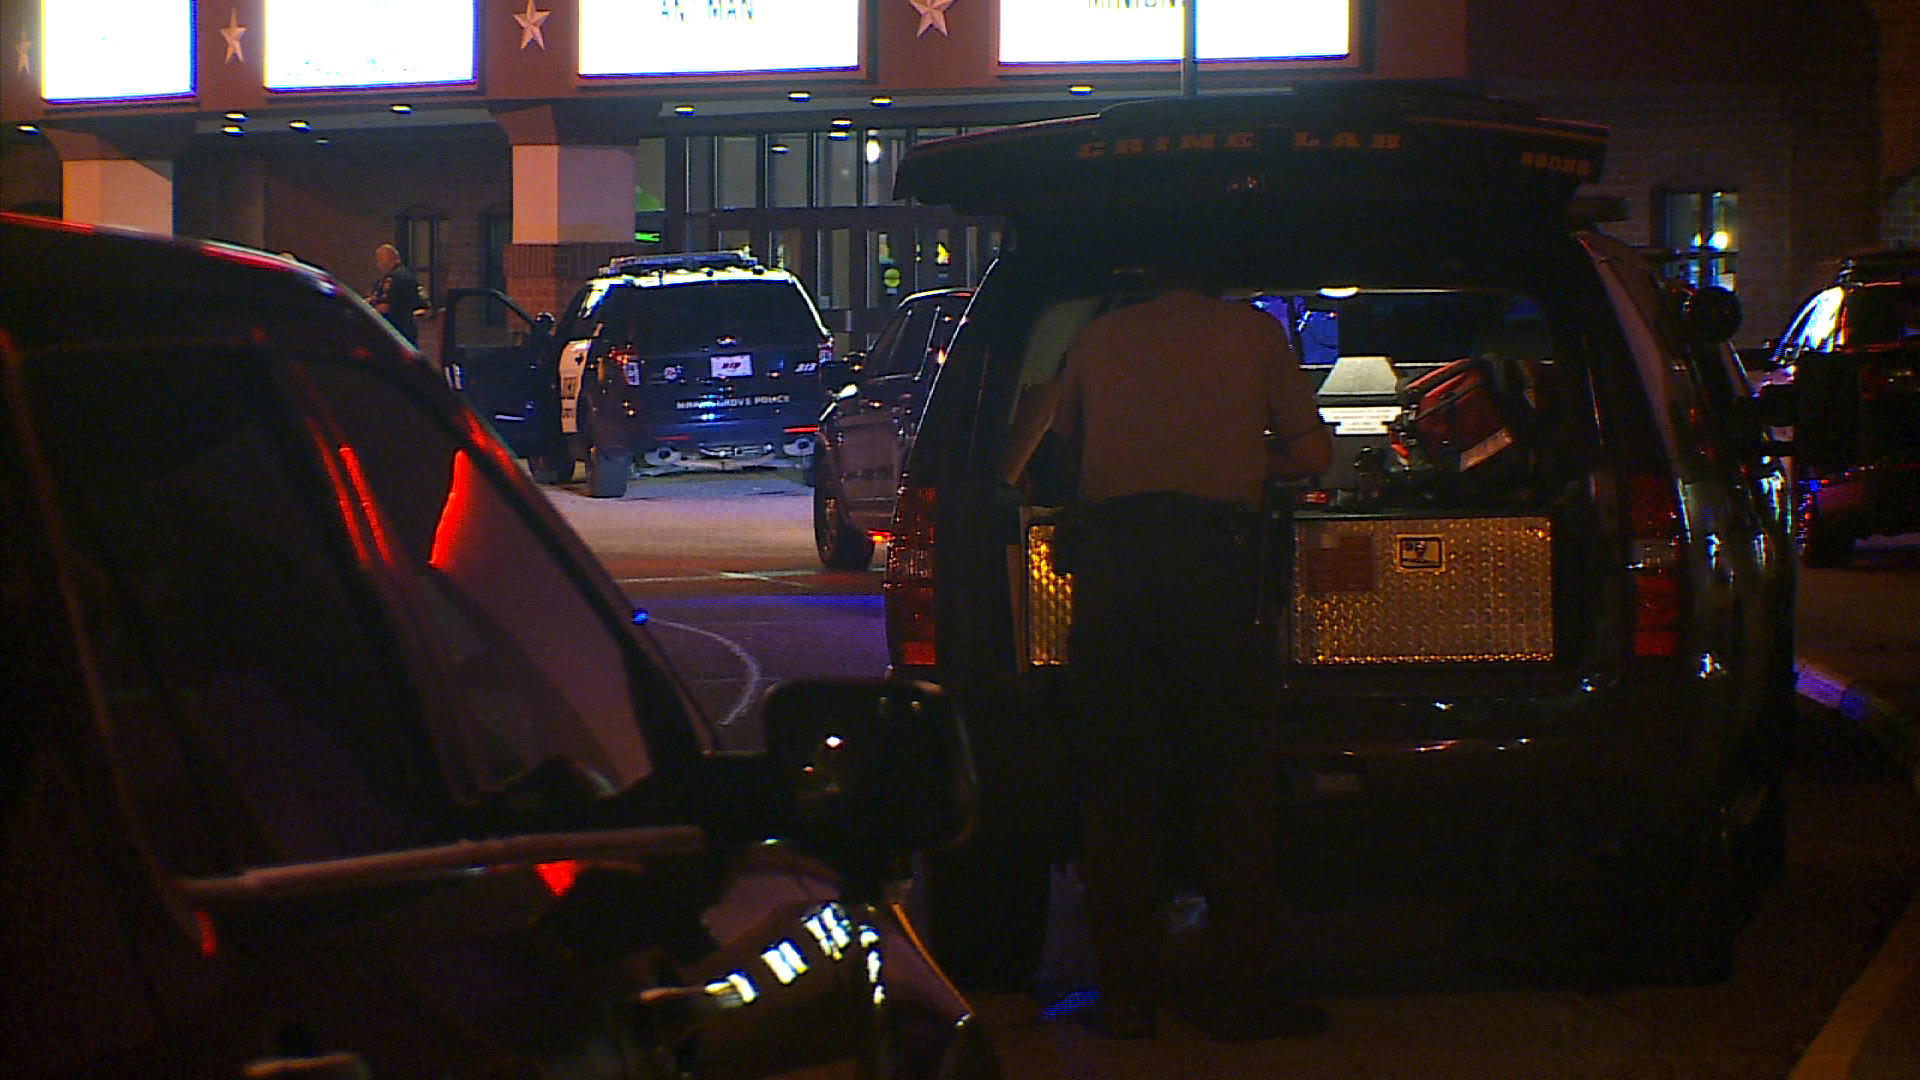 2 Shot In Maple Grove Movie Theater Parking Lot – WCCO | CBS Minnesota